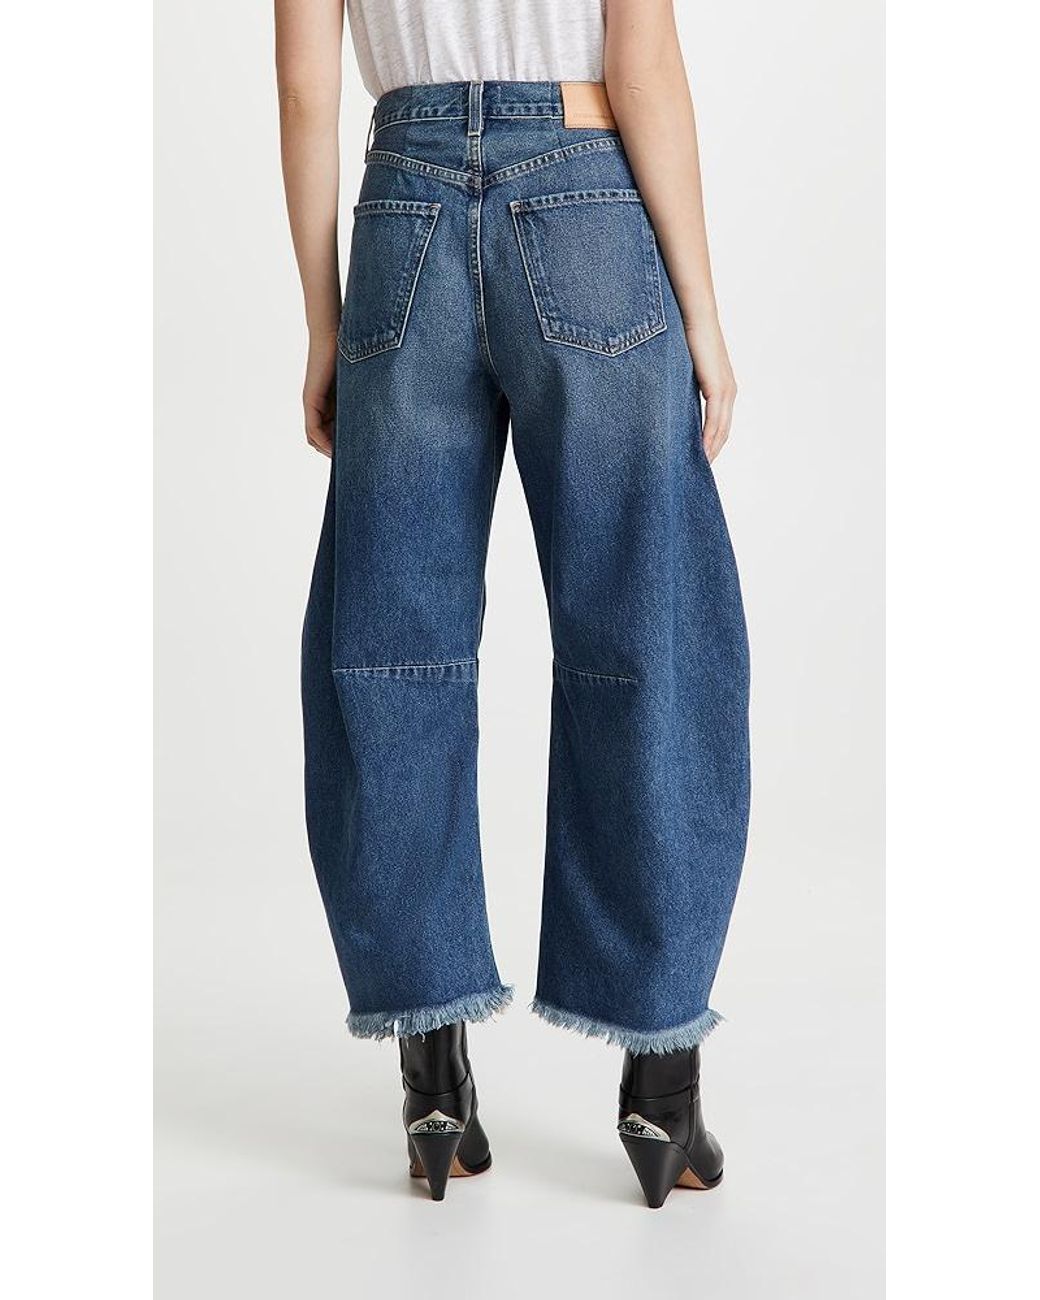 Citizens of Humanity Horseshoe Jeans in Blue   Lyst